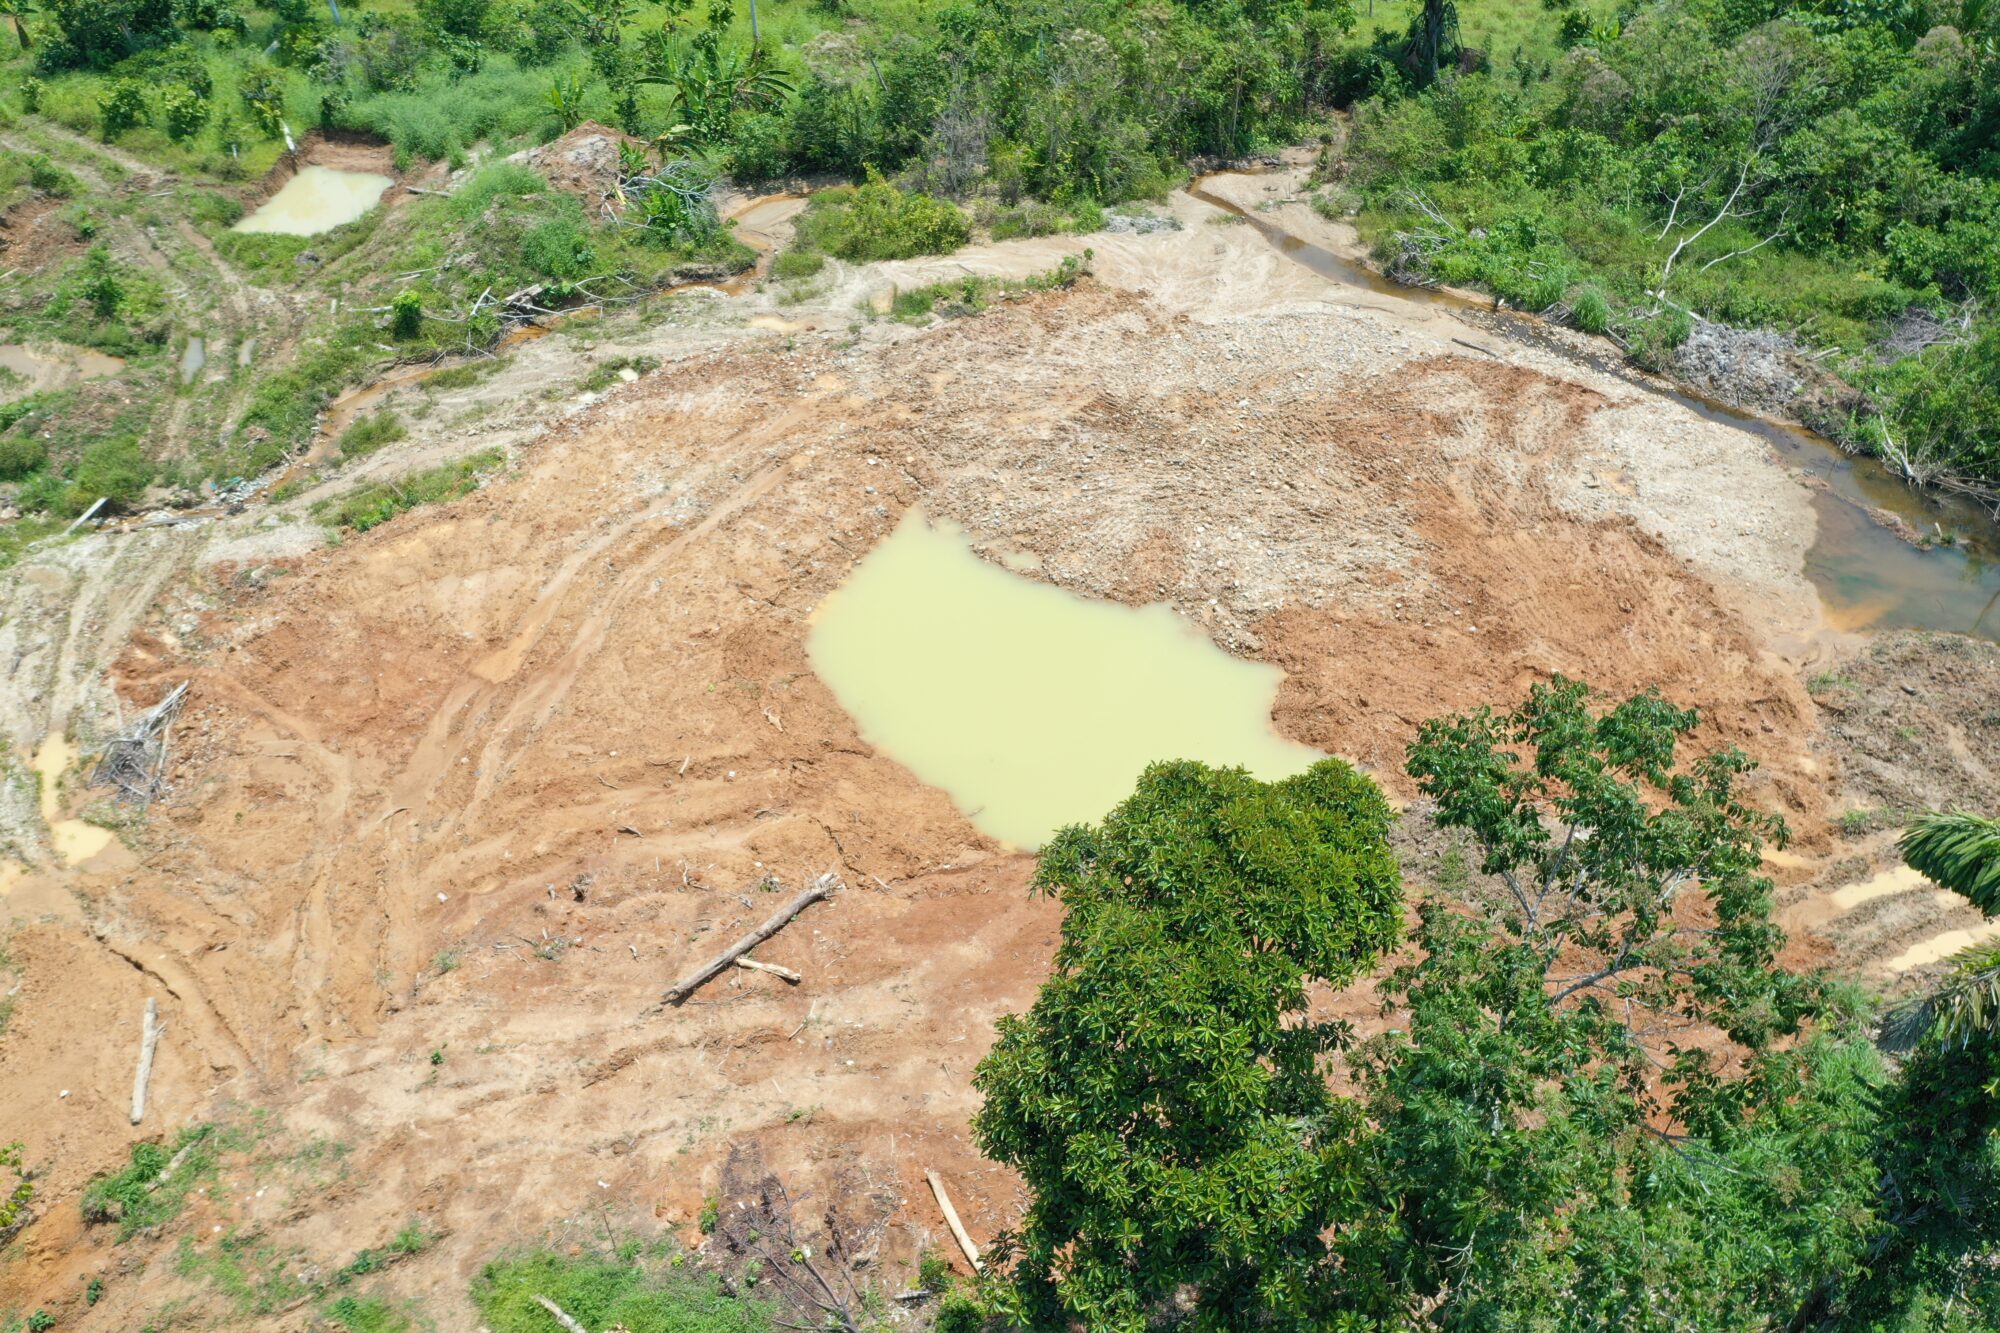 <p>Contaminated waters and destruction at an illegal mining site in Ahuano, Napo province, Ecuador. Activity has continued despite a temporary mining ban introduced in the province in early 2022 (Image courtesy of Napo Resiste)</p>